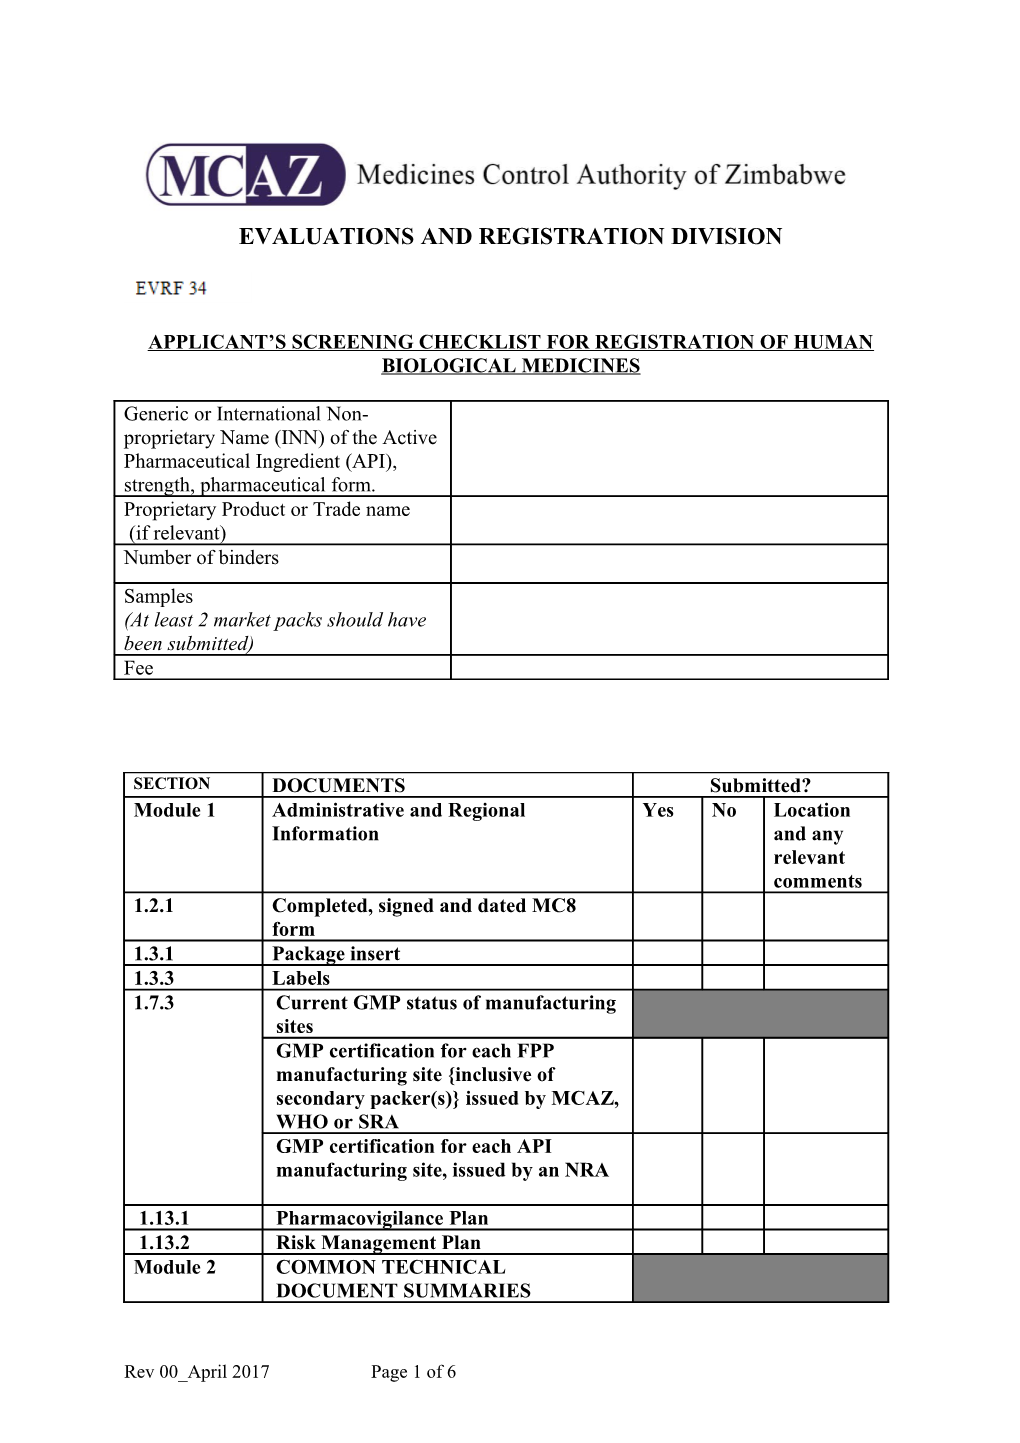 Evaluations and Registration Division